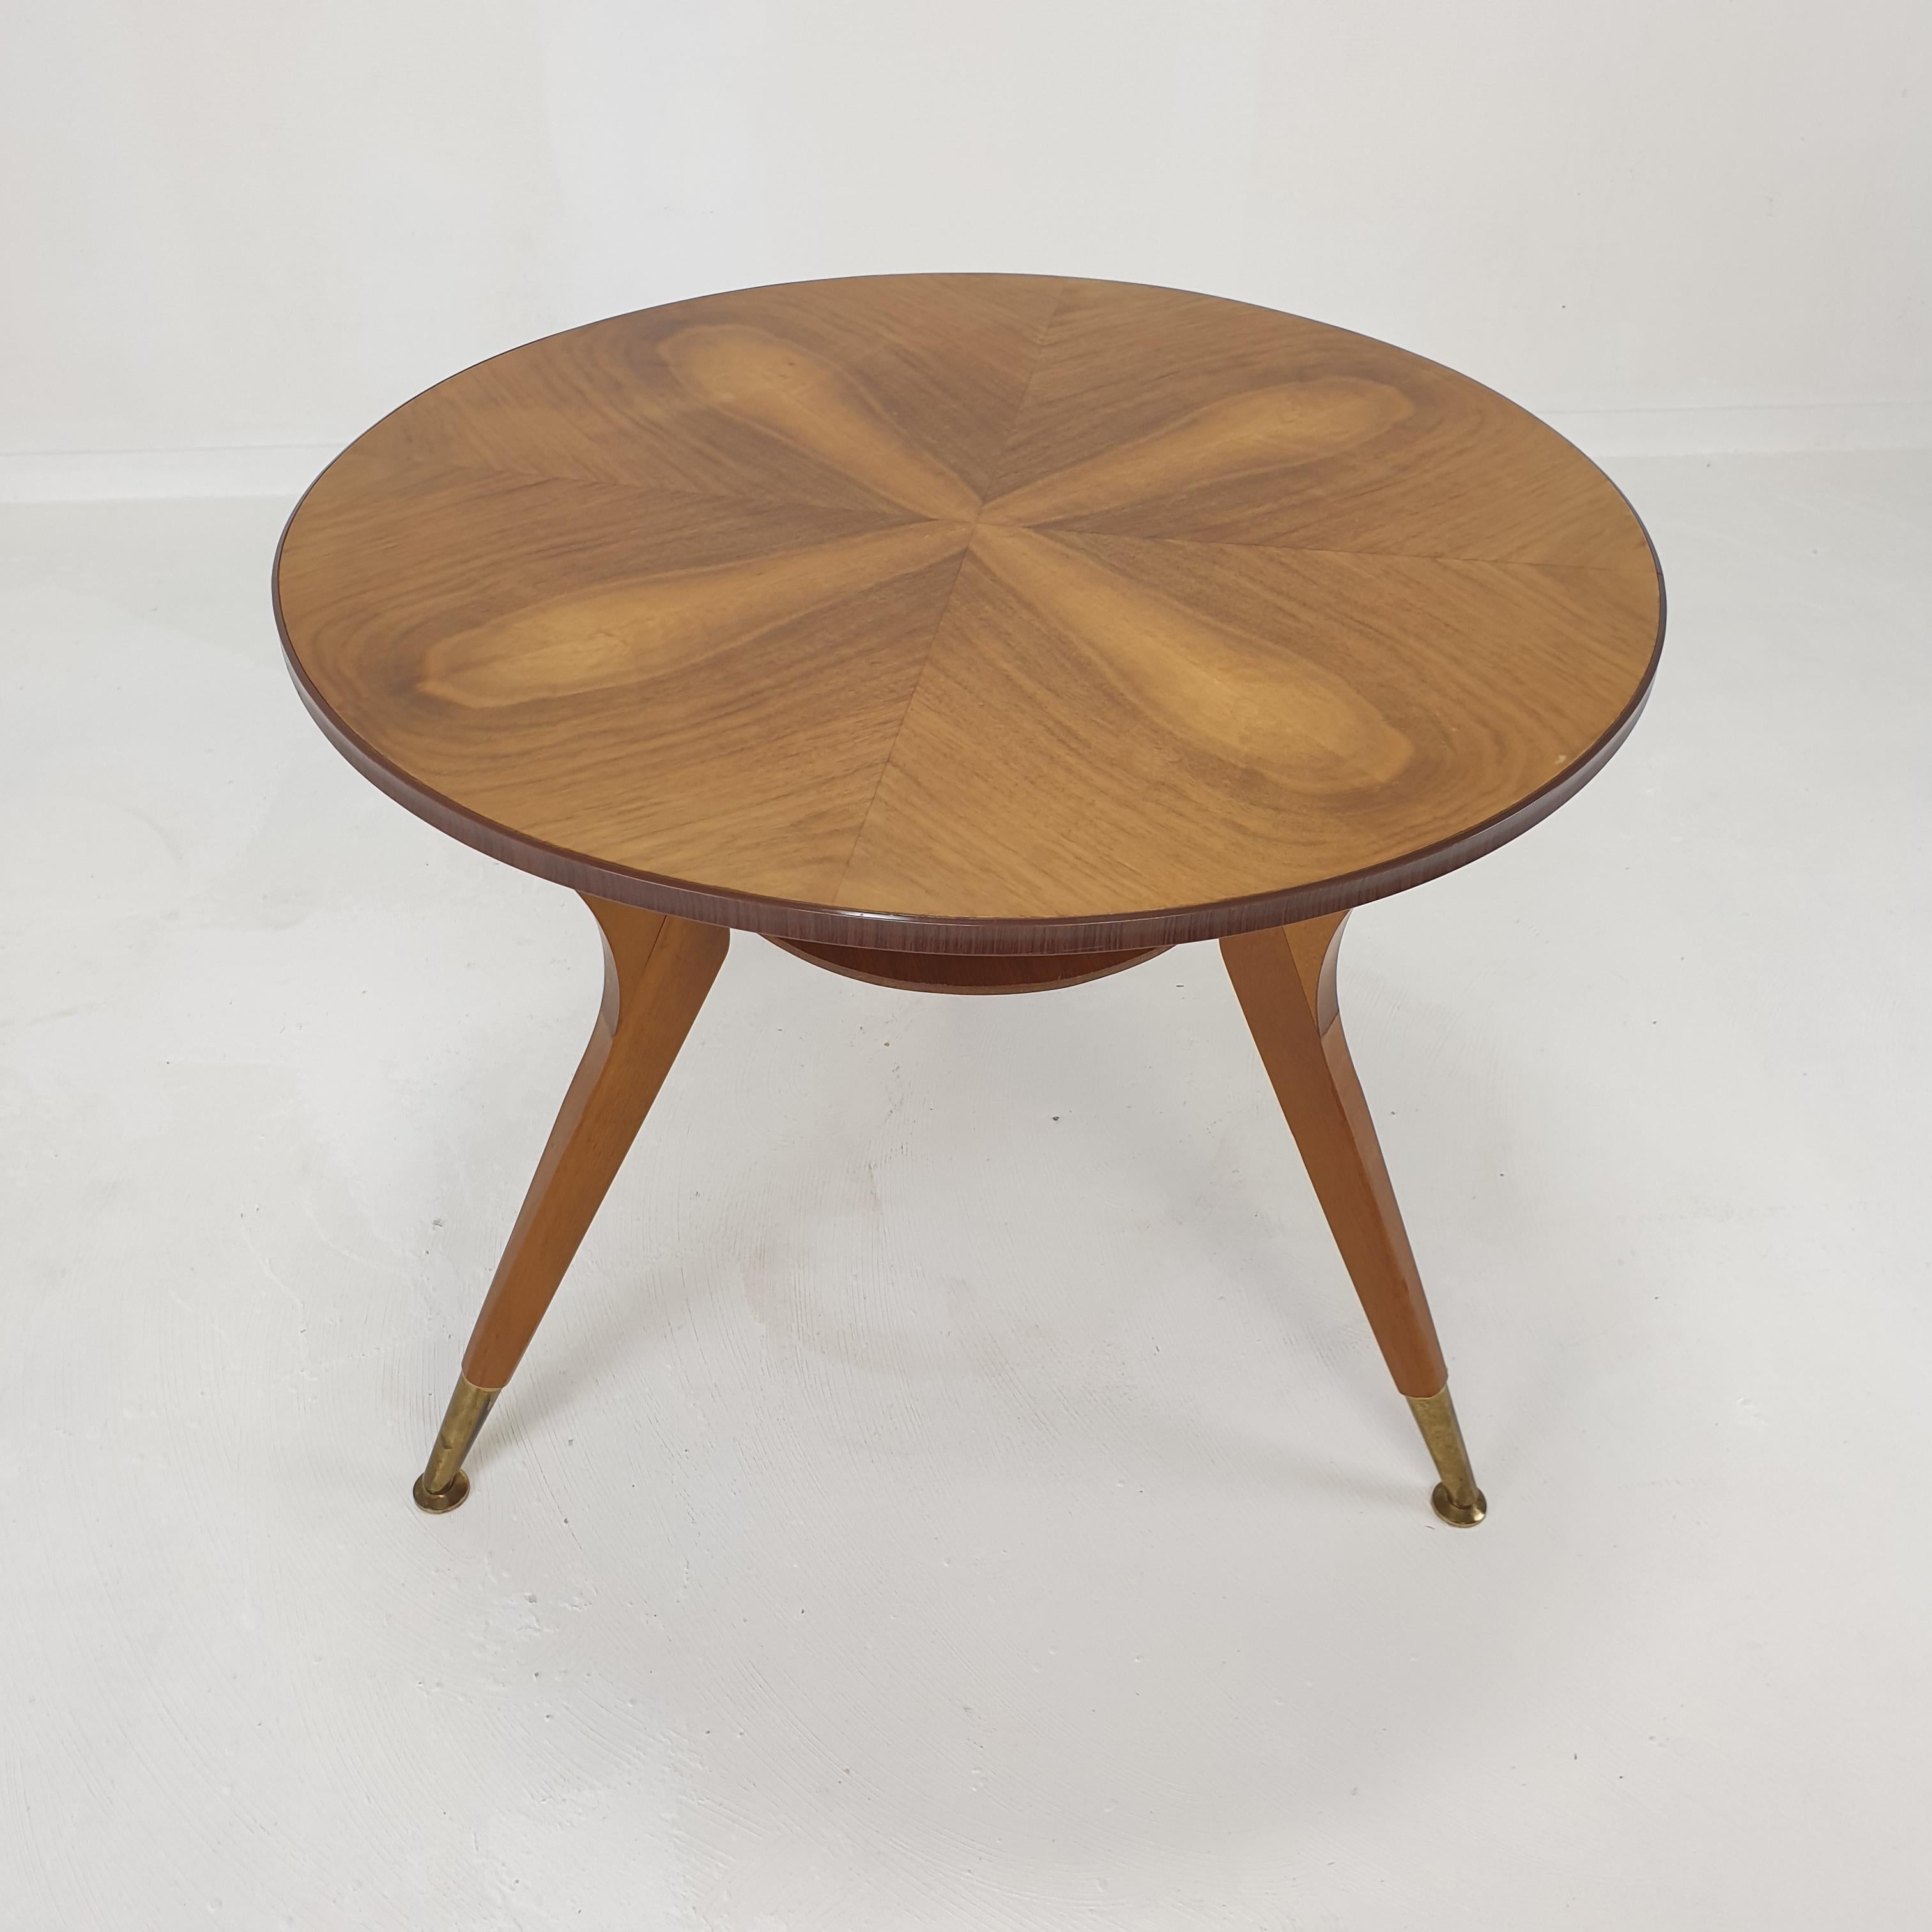 Midcentury Italian Wooden Coffee or Side Table with Brass Feet, 1960s For Sale 7